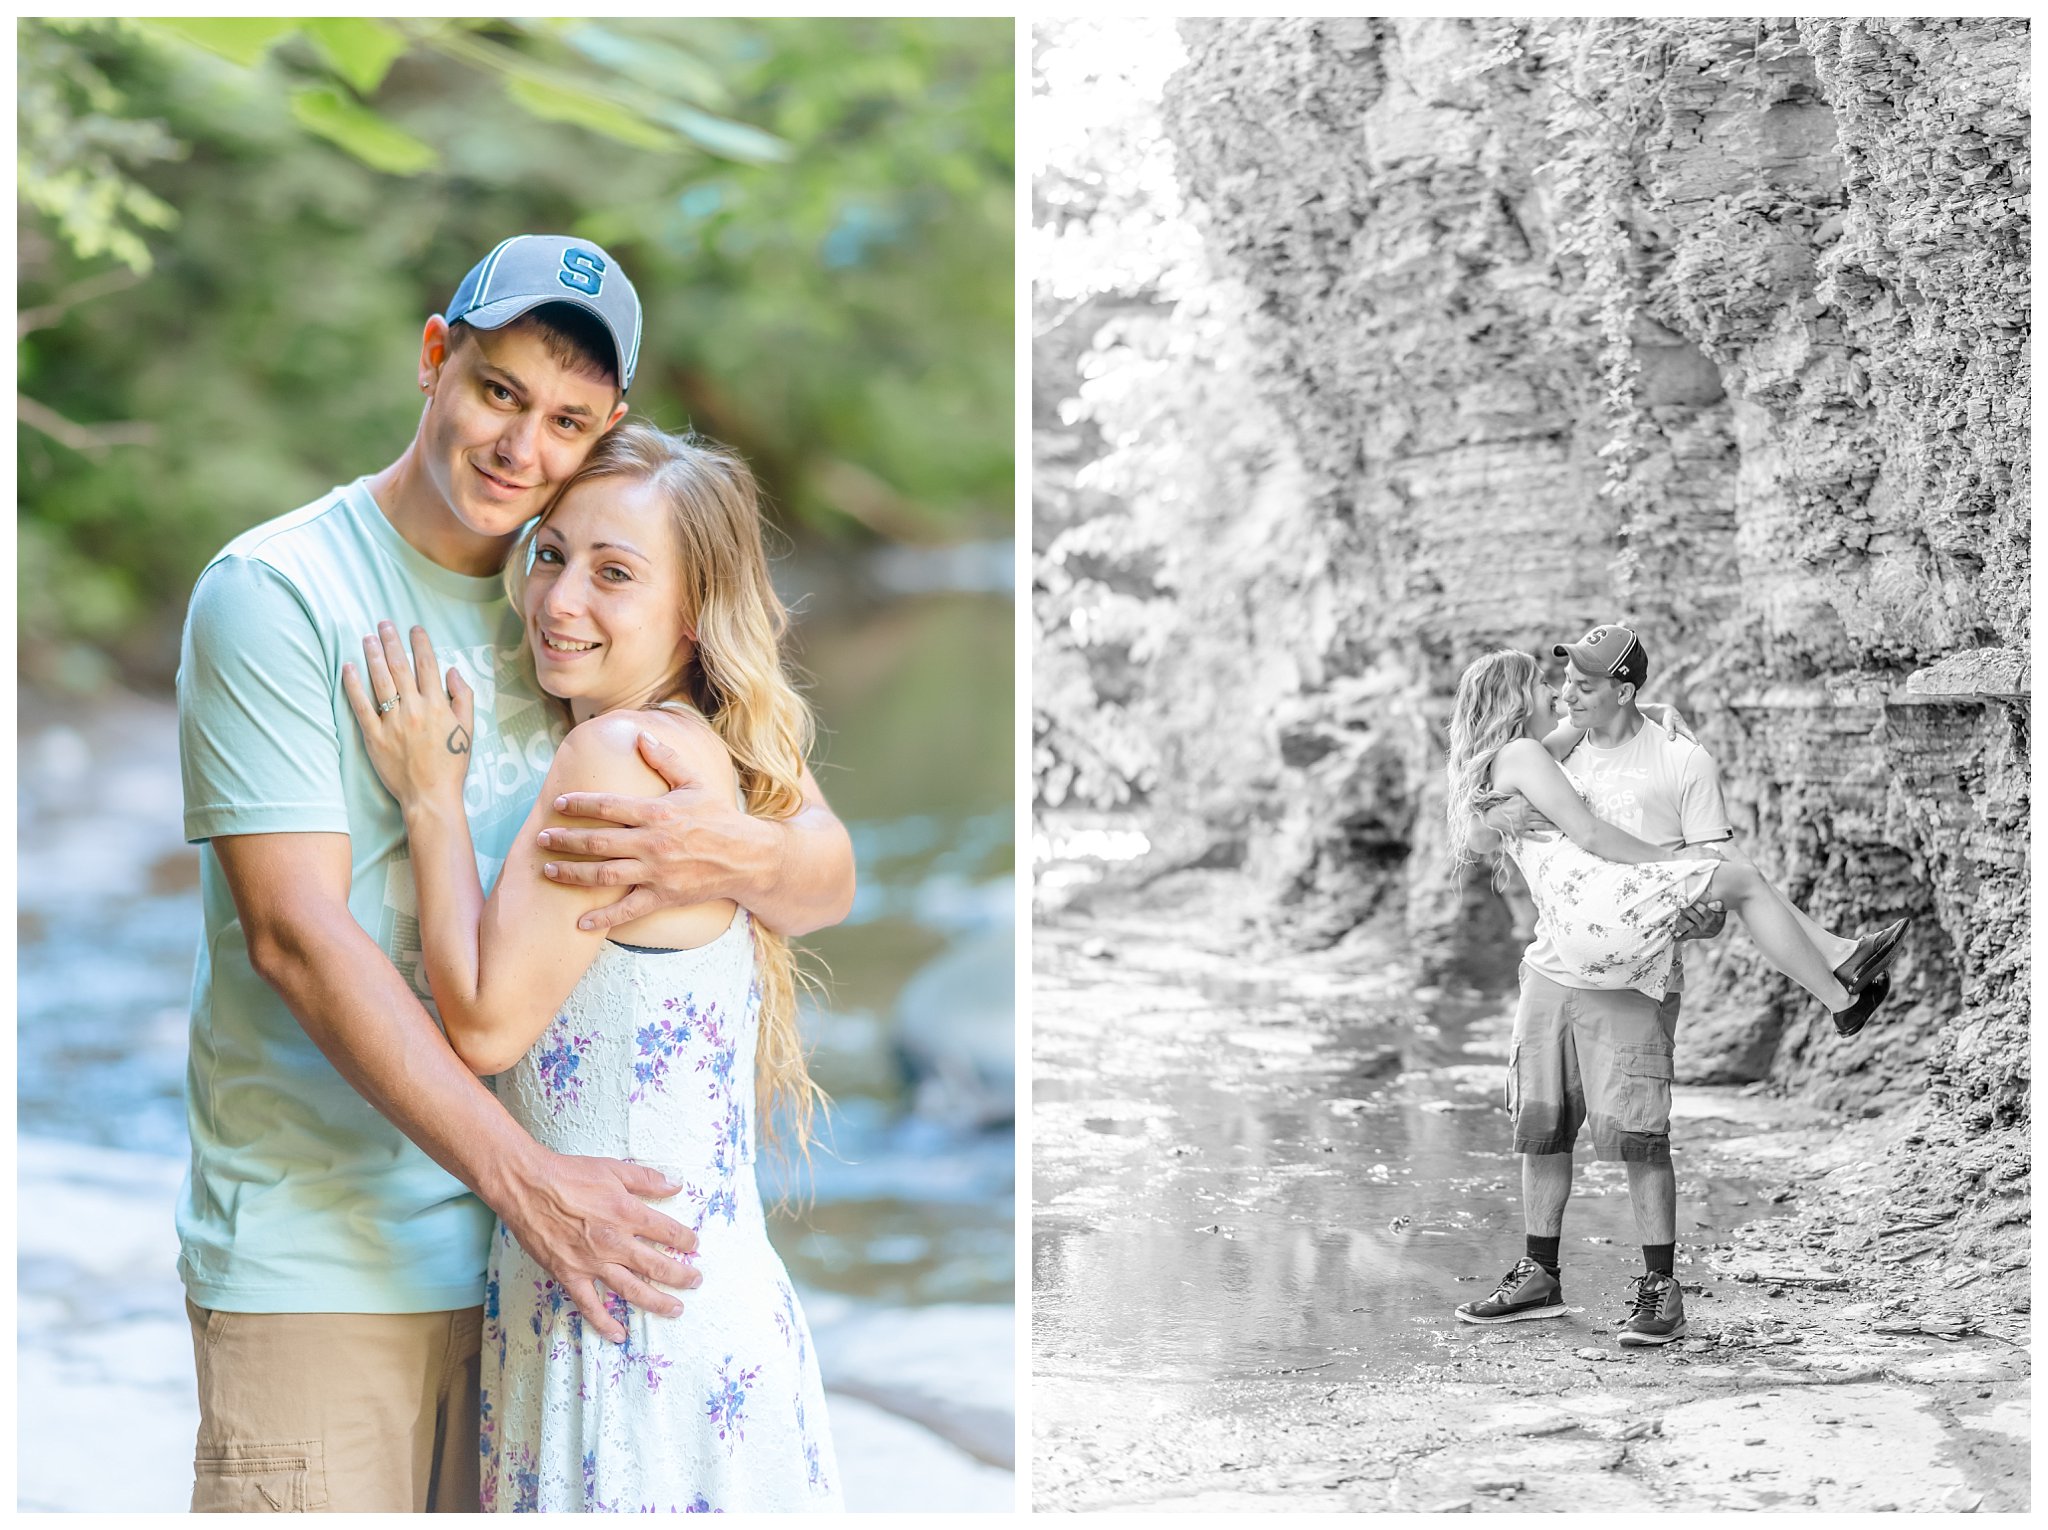 Joanna Young Photography Elizabeth and Cody Engagement Session_0009.jpg